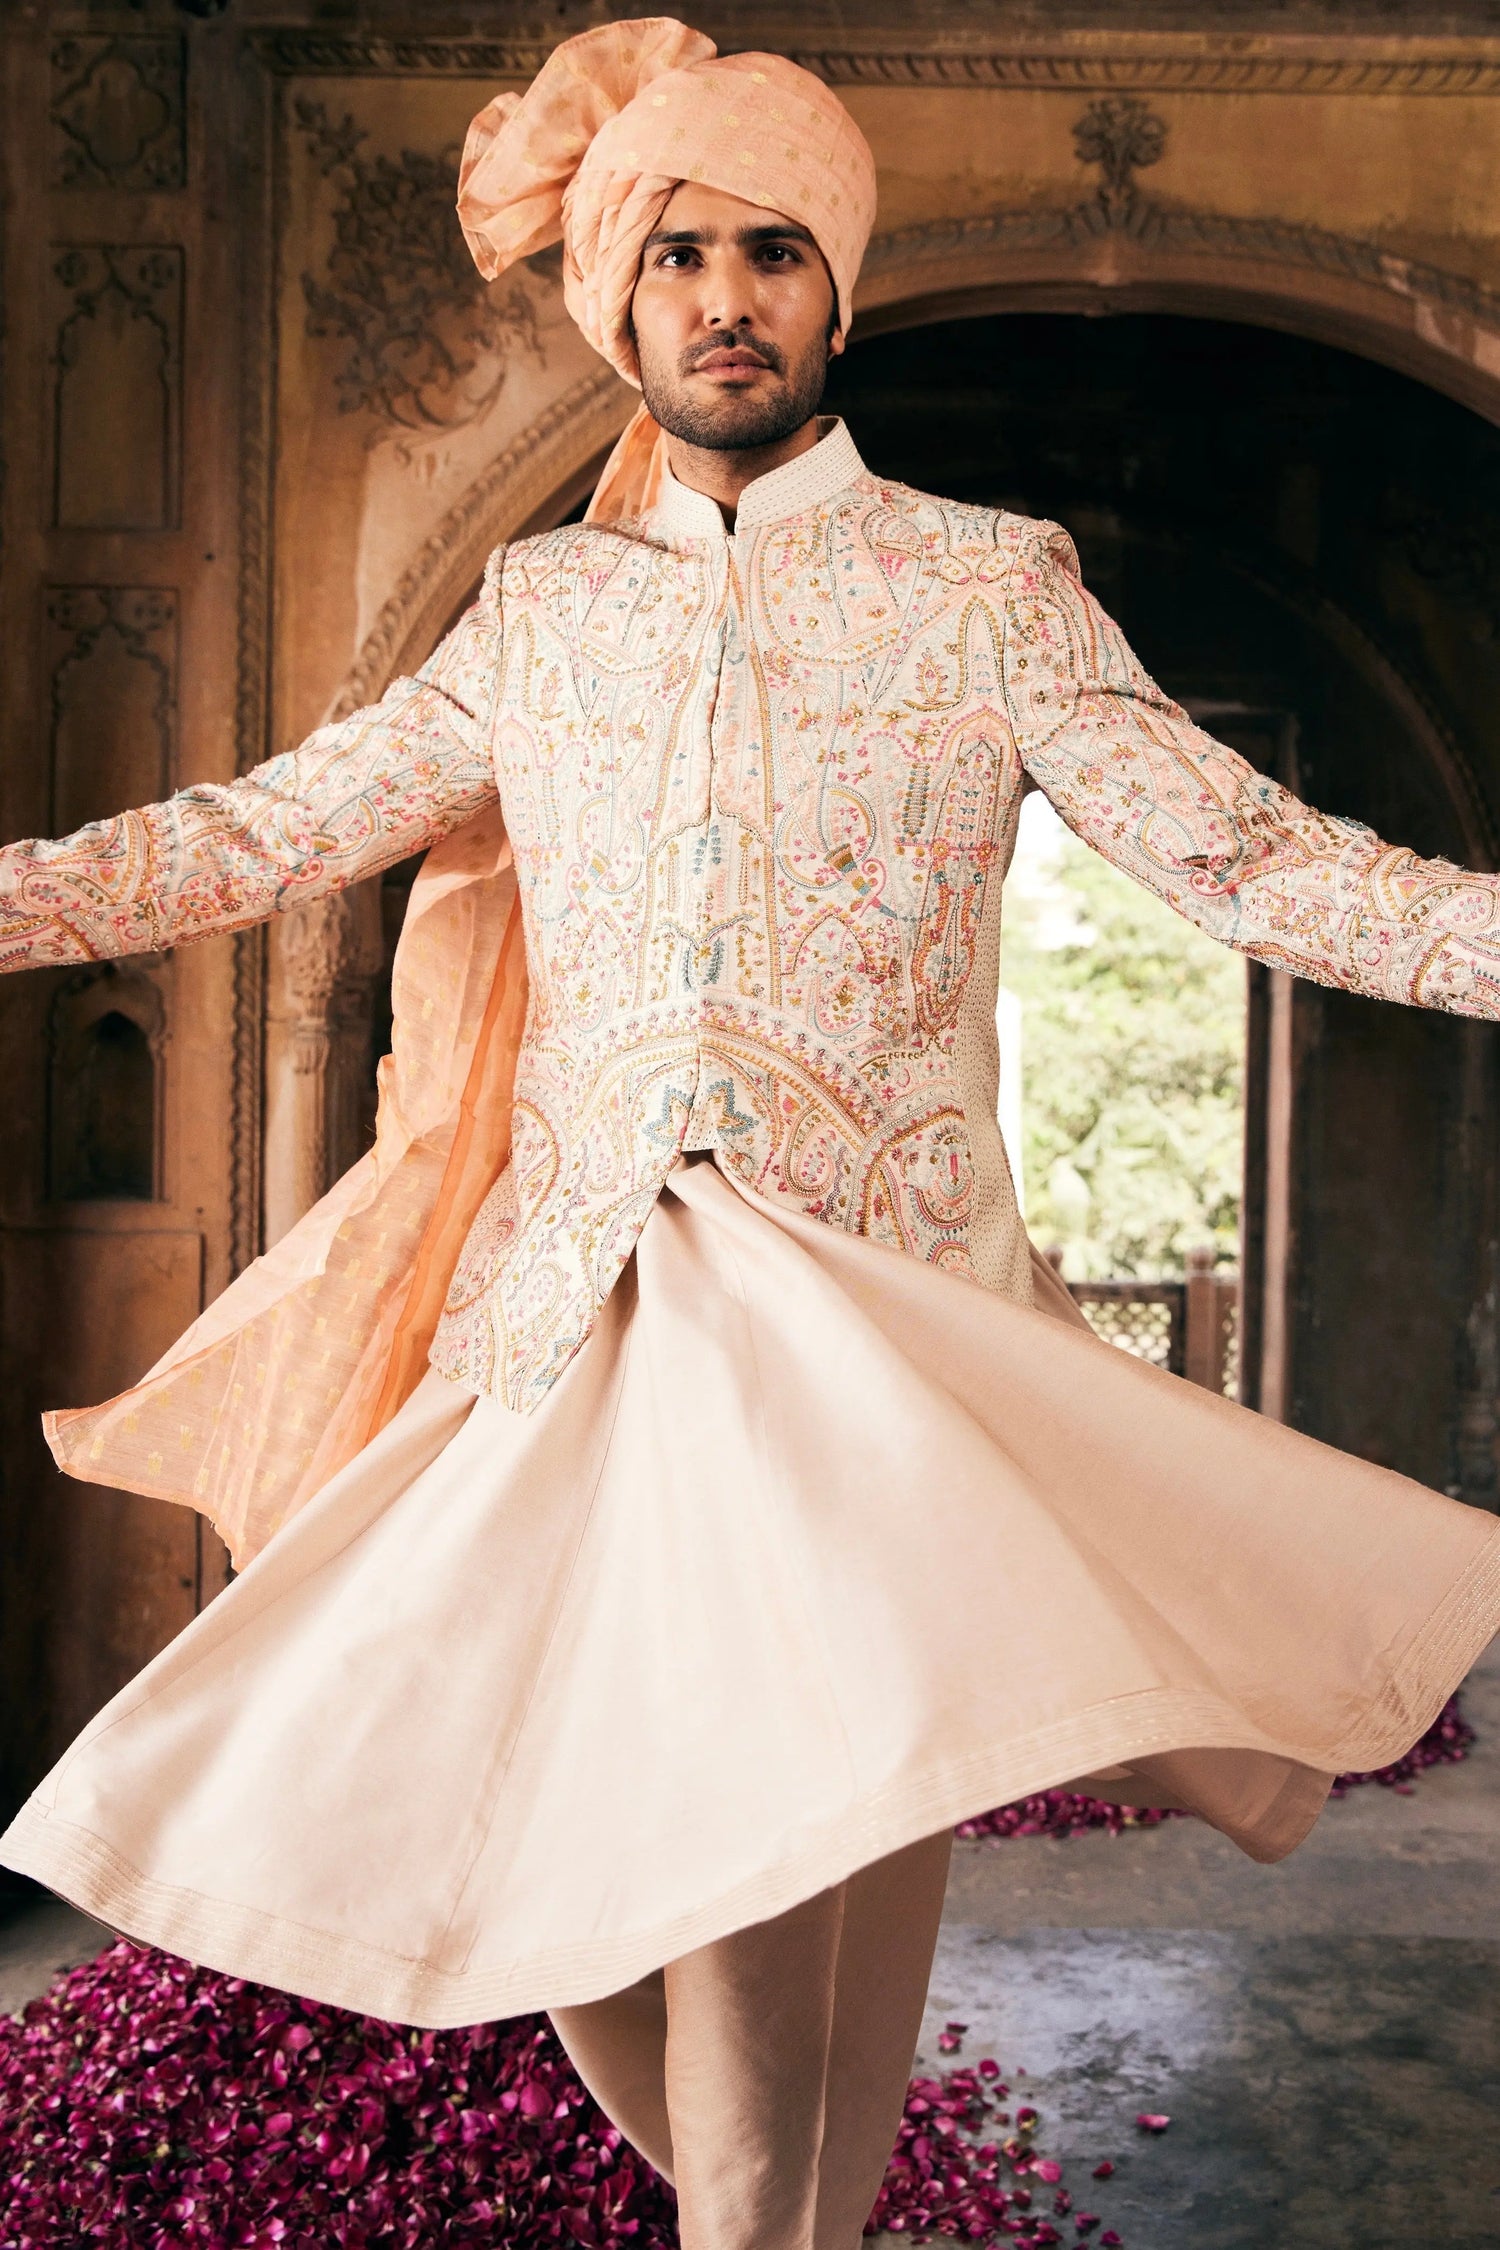 Cream Bandhgala with Multi Colored Embroidery